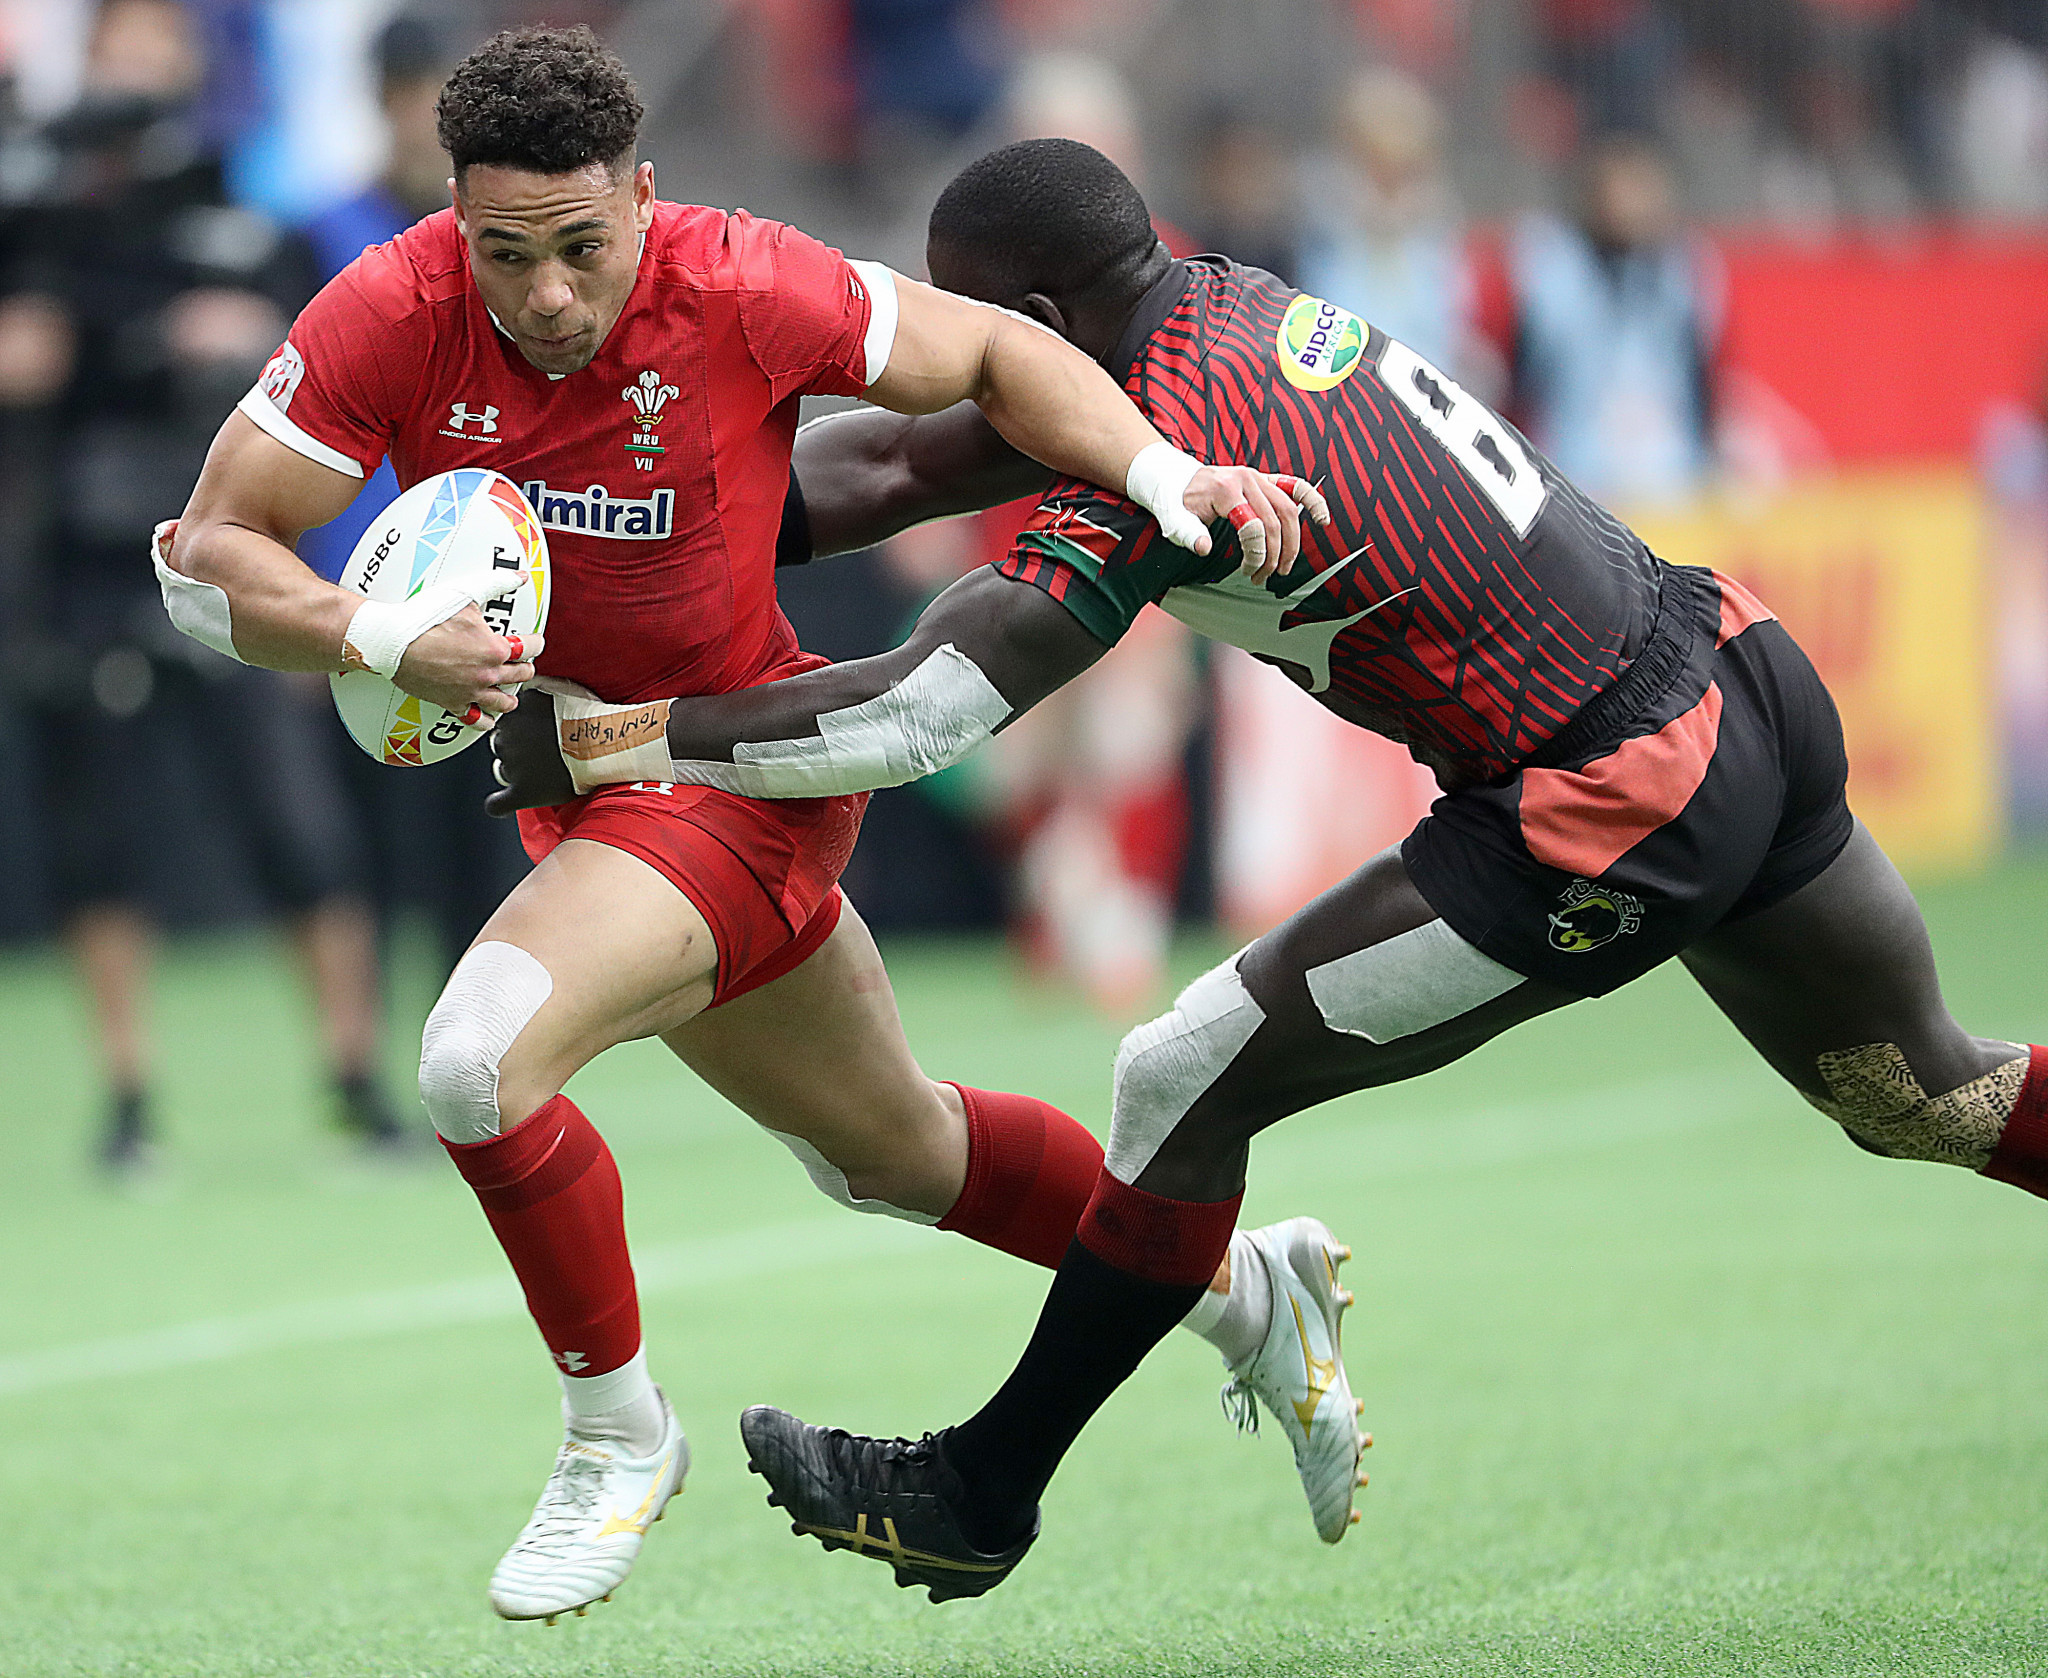 Wales rugby sevens programme ceases operations due to coronavirus crisis